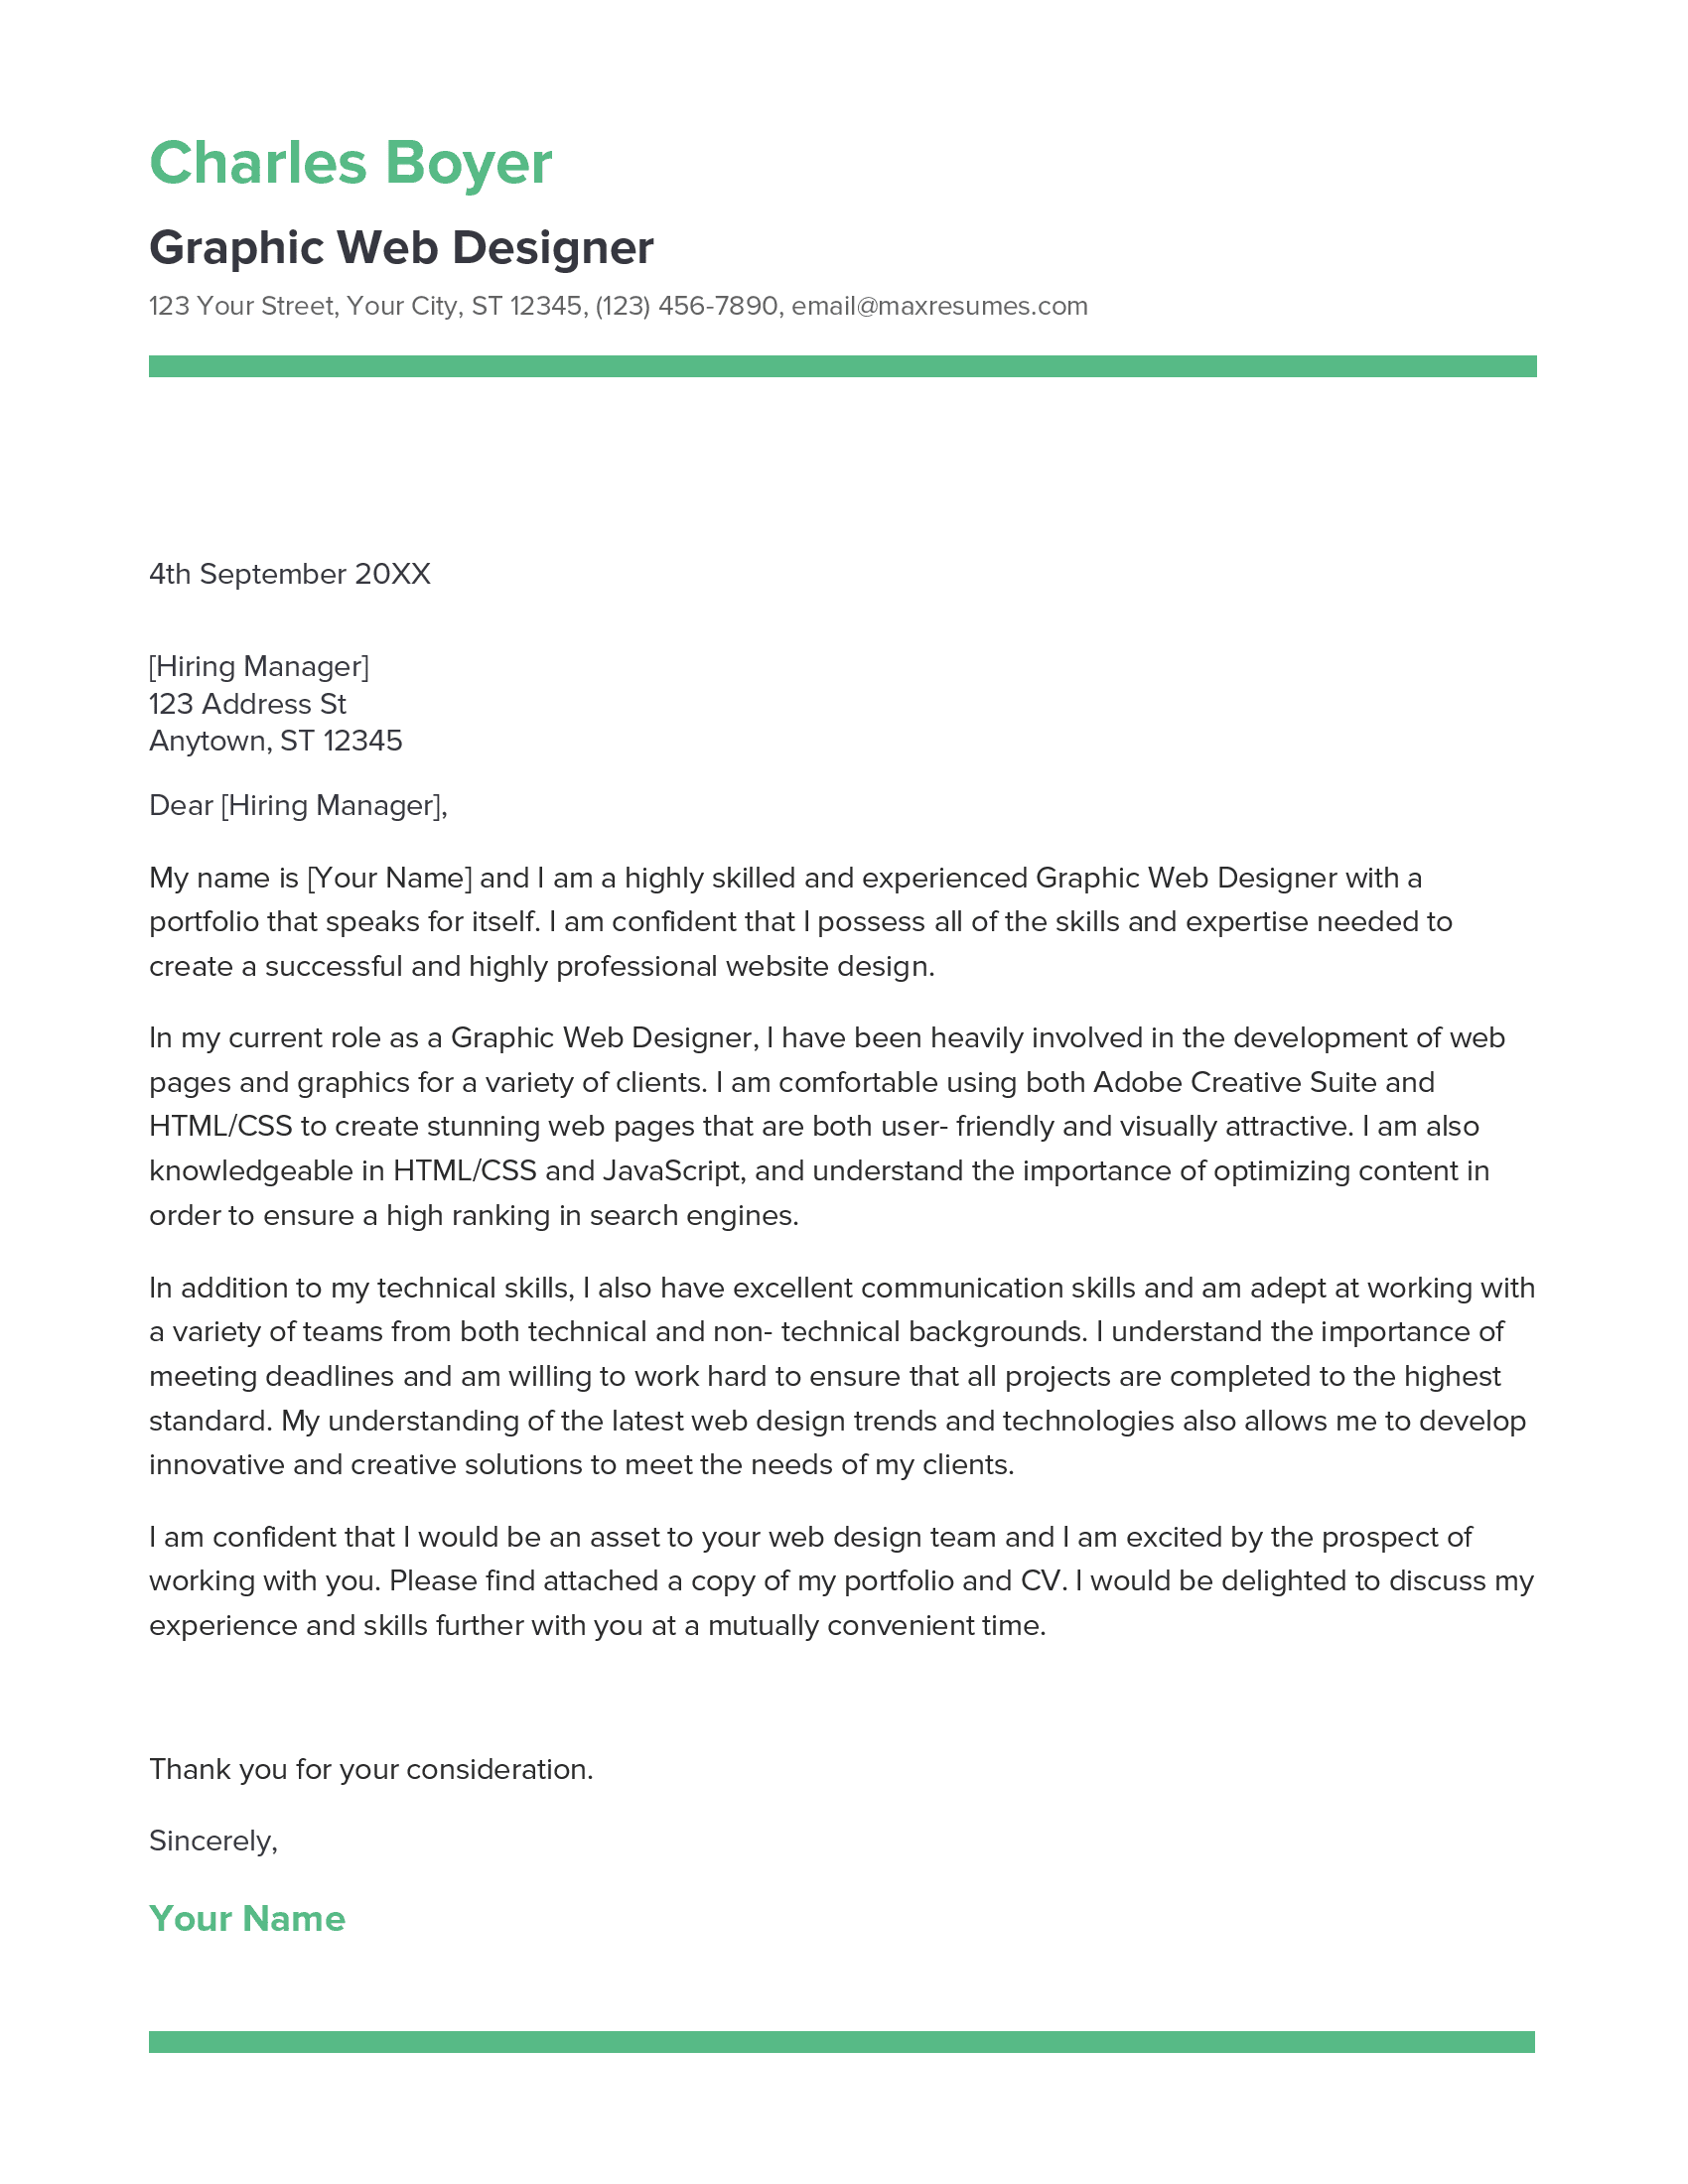 Graphic Web Designer Cover Letter Example